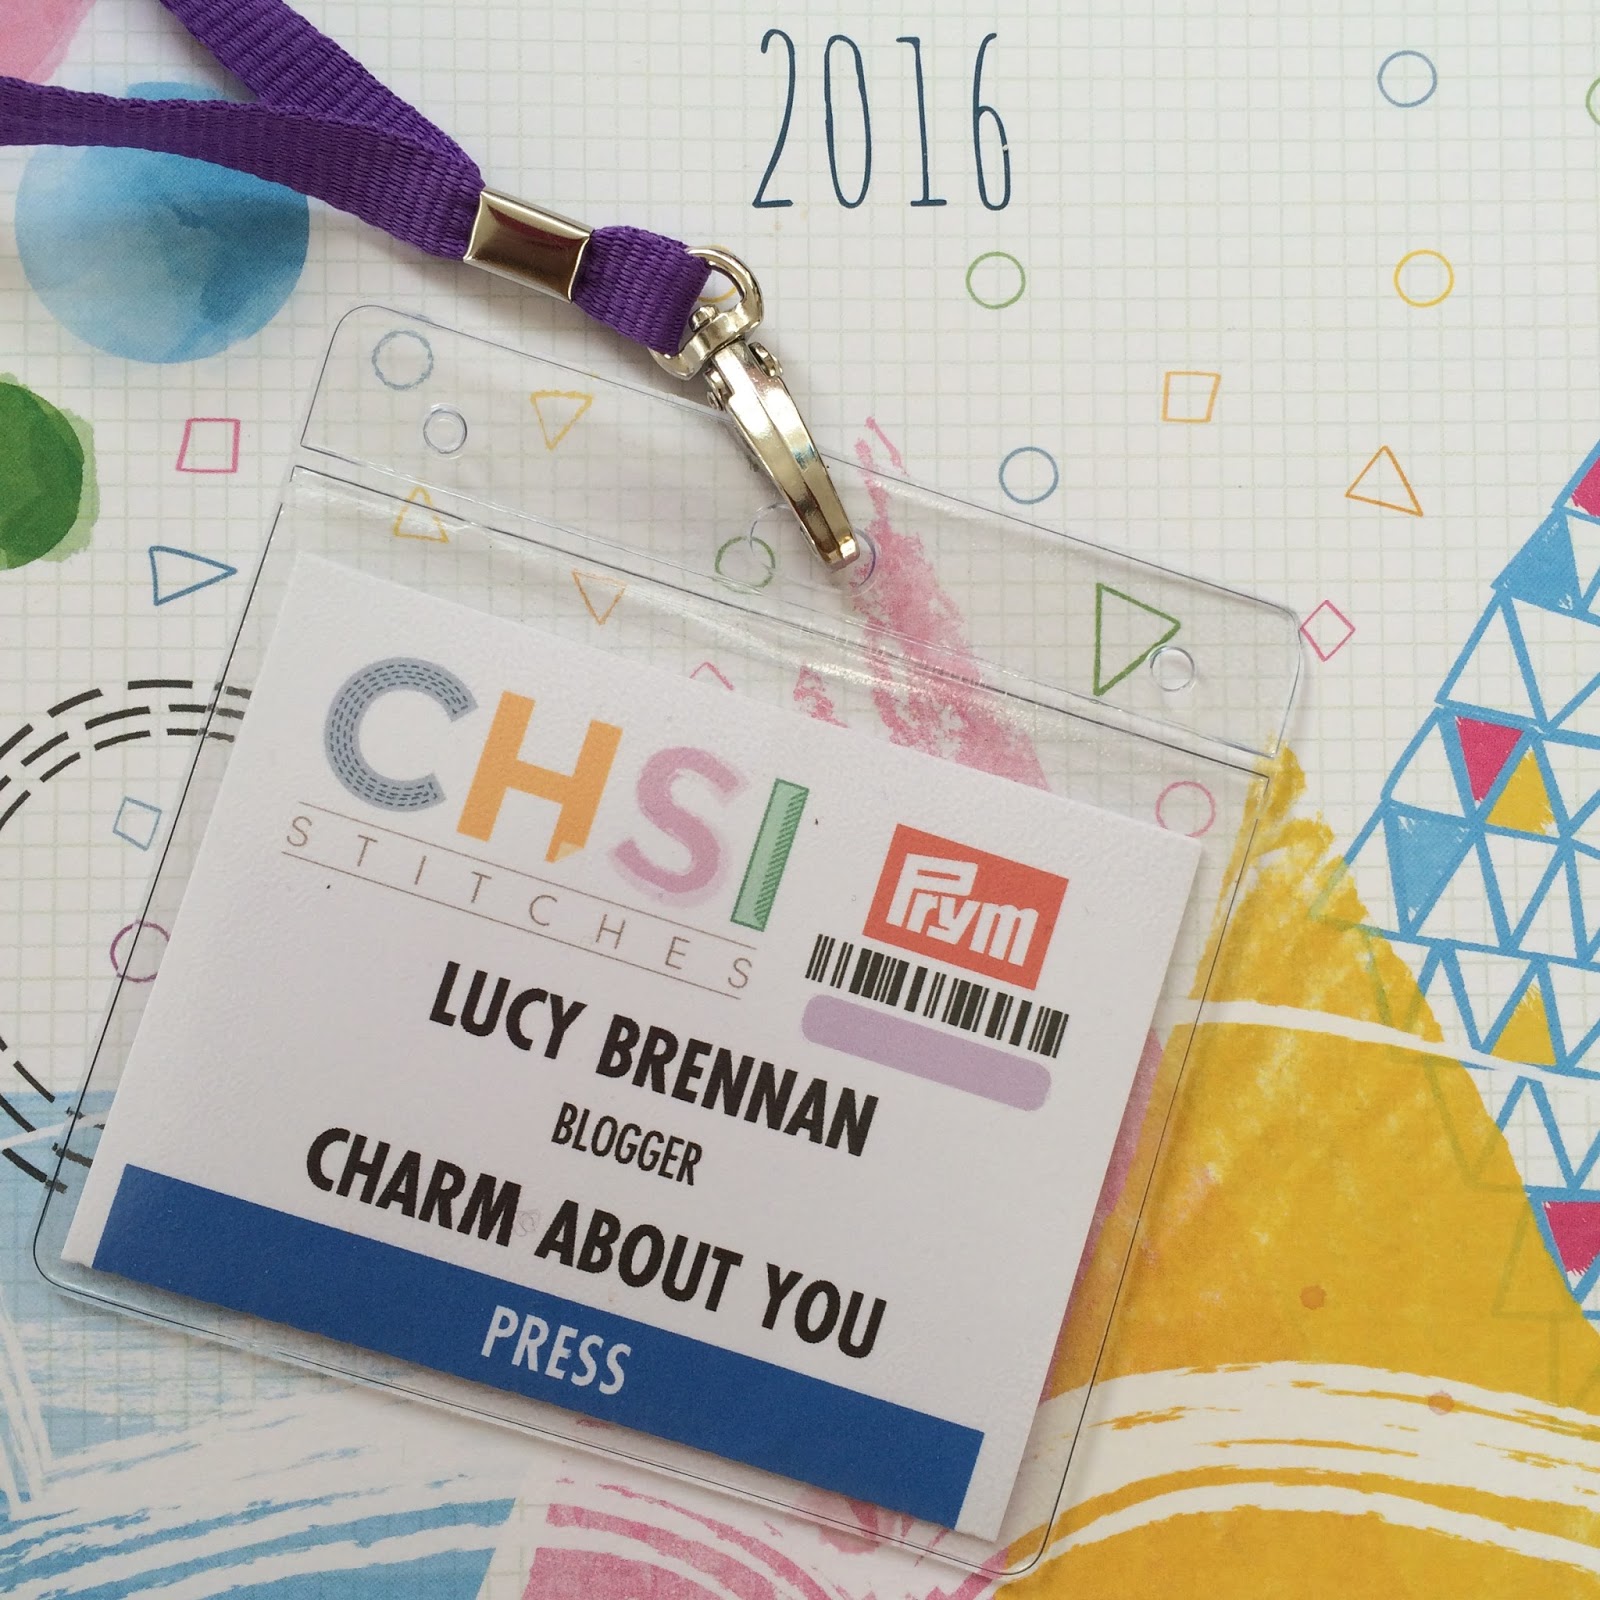 CHSI Stitches 2016 / CHARM ABOUT YOU